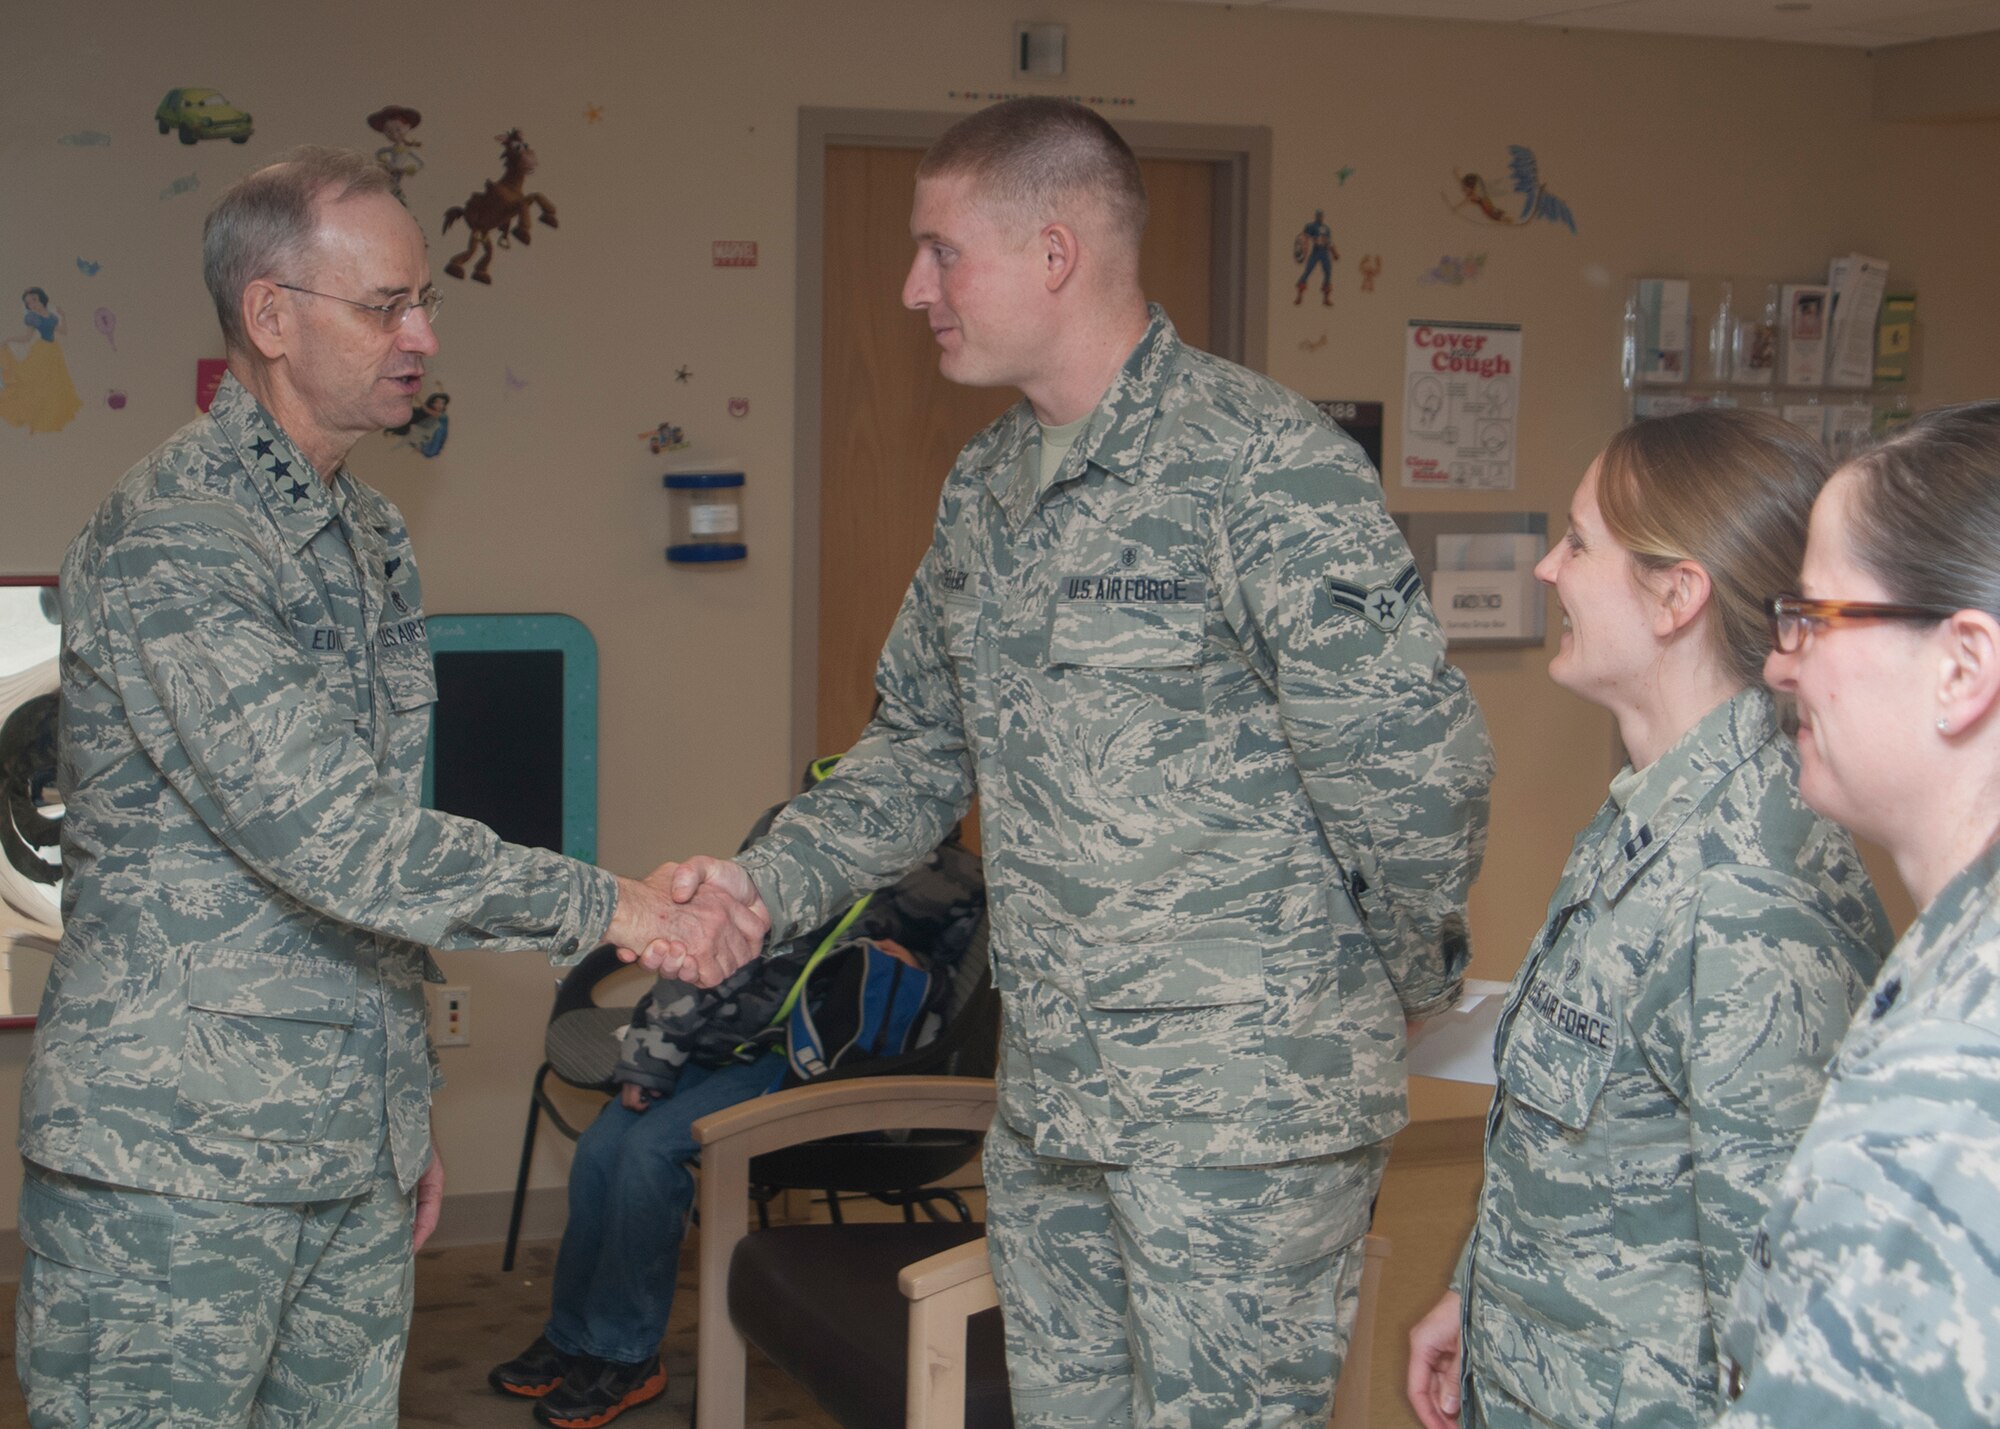 Lt. Gen. Mark Ediger, the Air Force Surgeon General, meets Airman 1st Class Cody Sellick, Capt. Michelle Kiger and Lt. Col. (Dr.) while during his visit to the Wright-Patterson Medical Center on Jan. 13, 2015. 